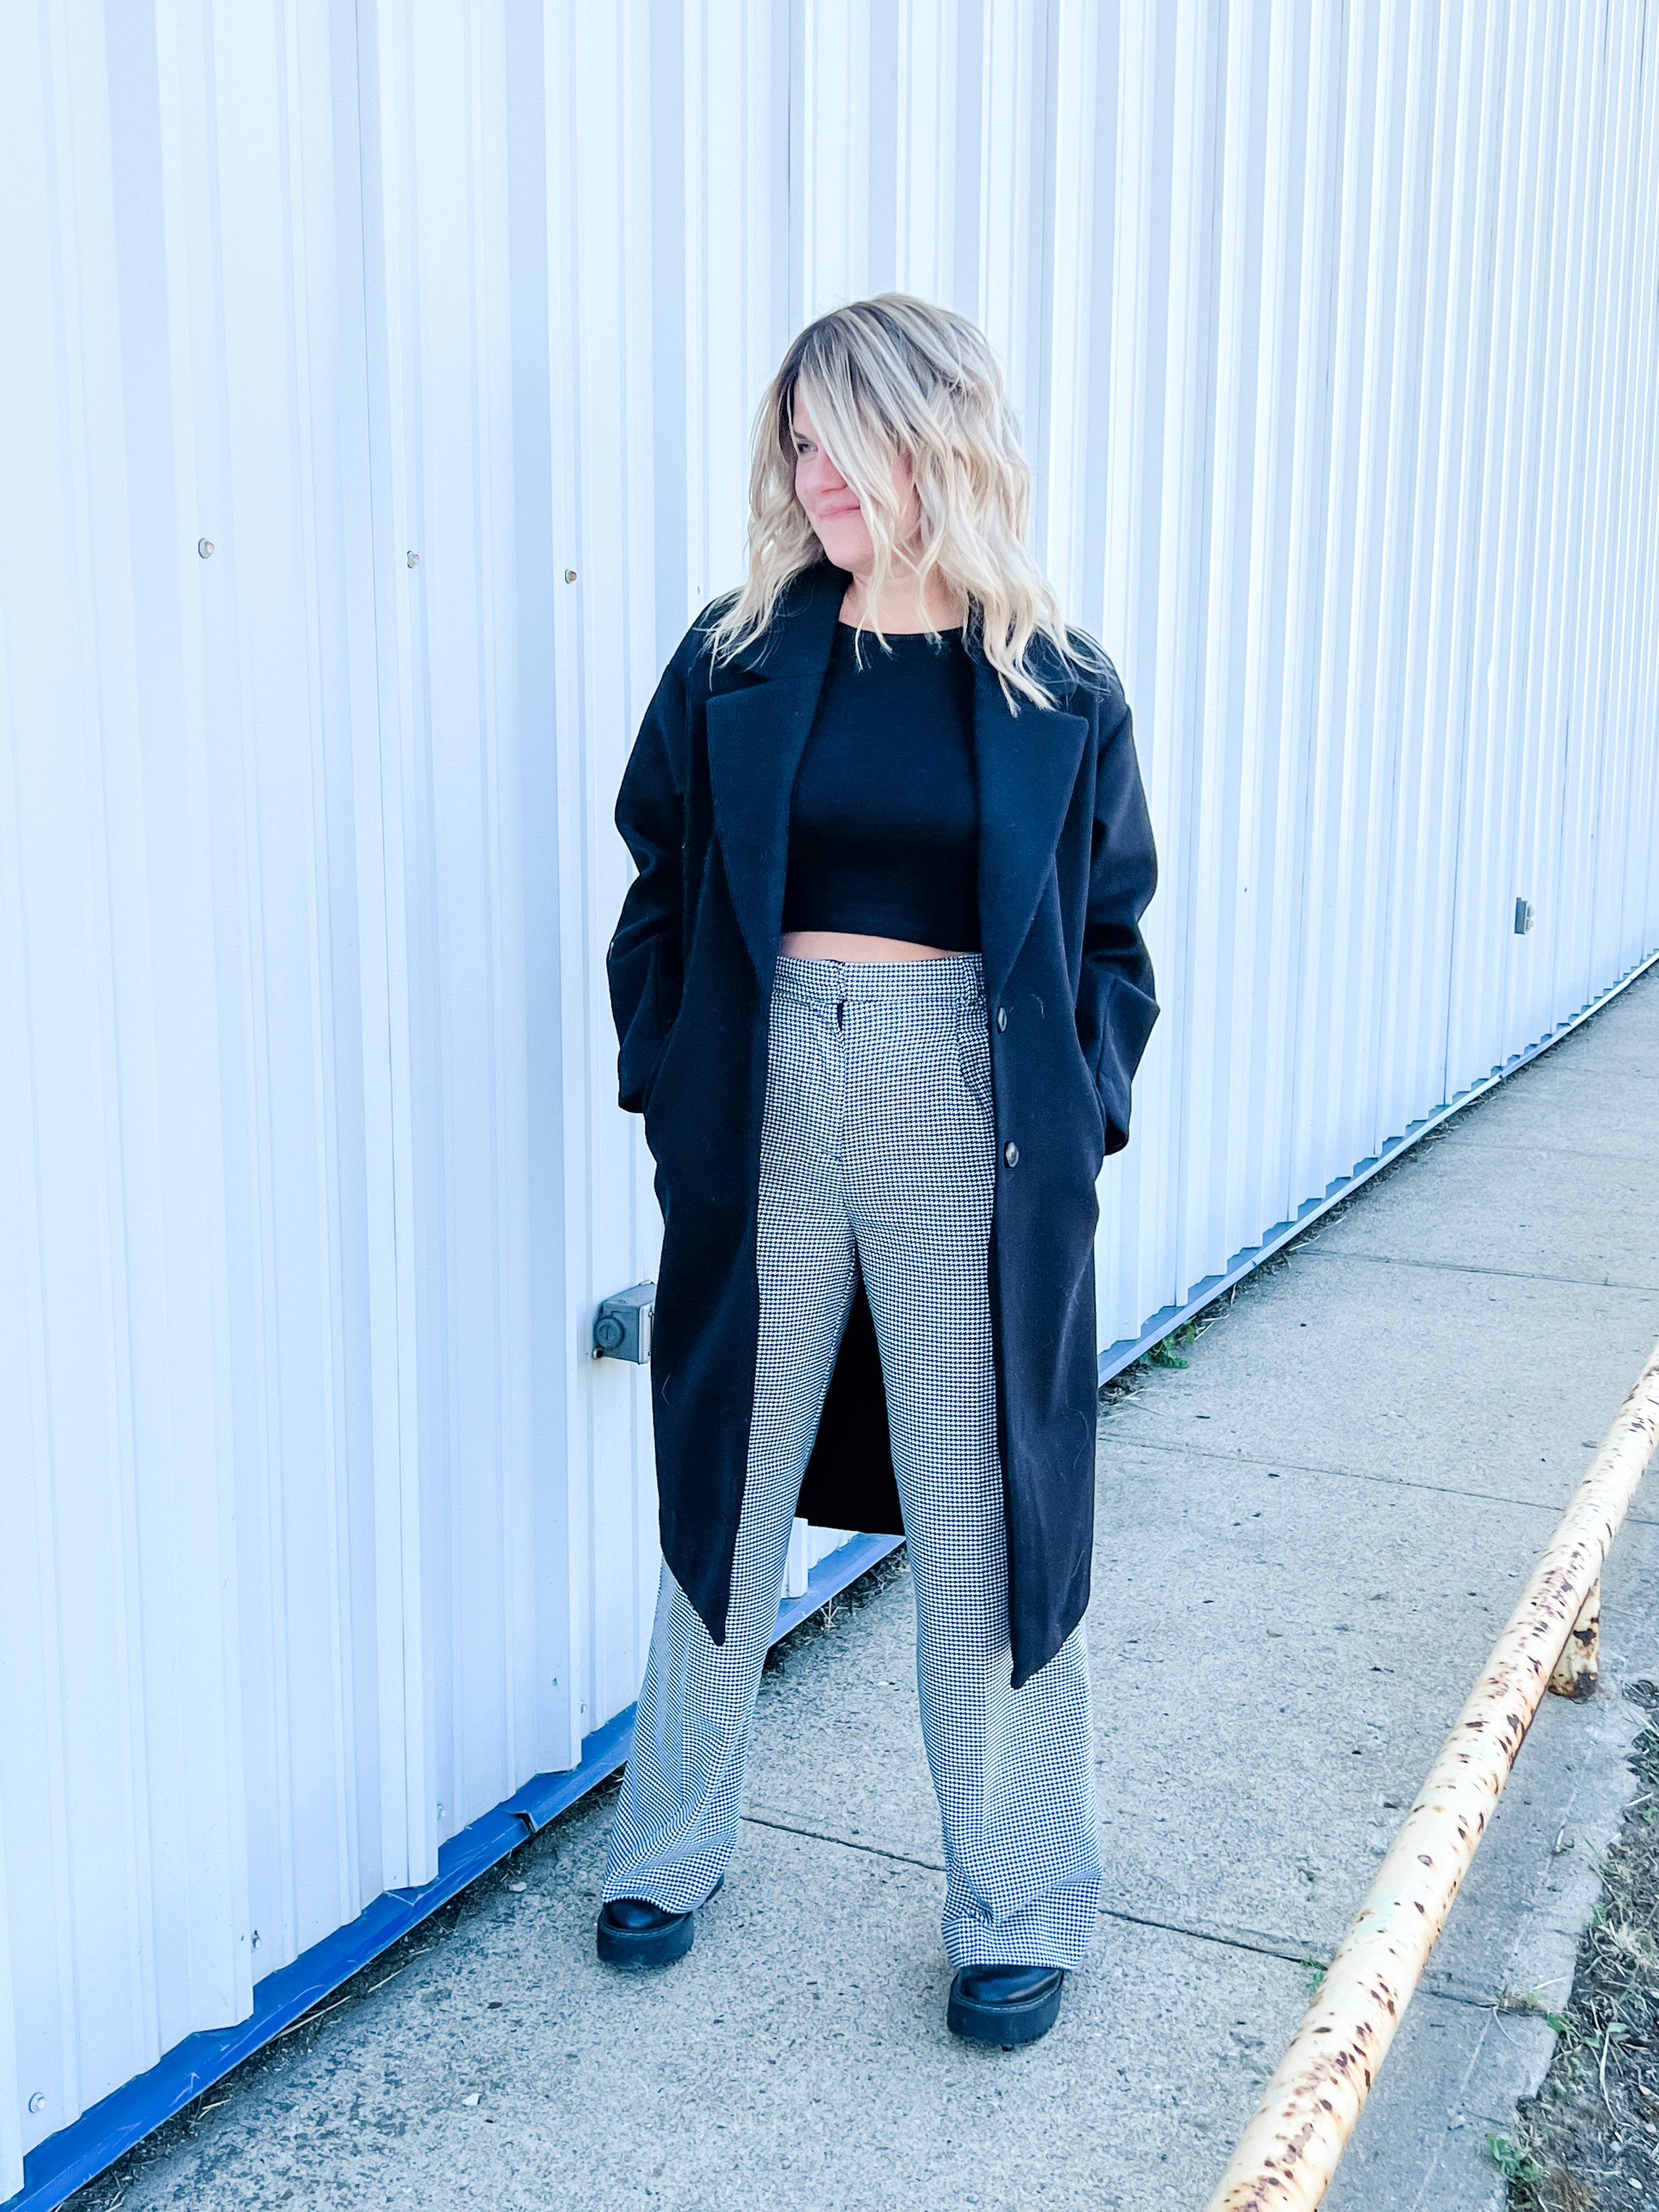 WIDE-LEG TROUSERS PAIRED WITH COMBAT BOOTS